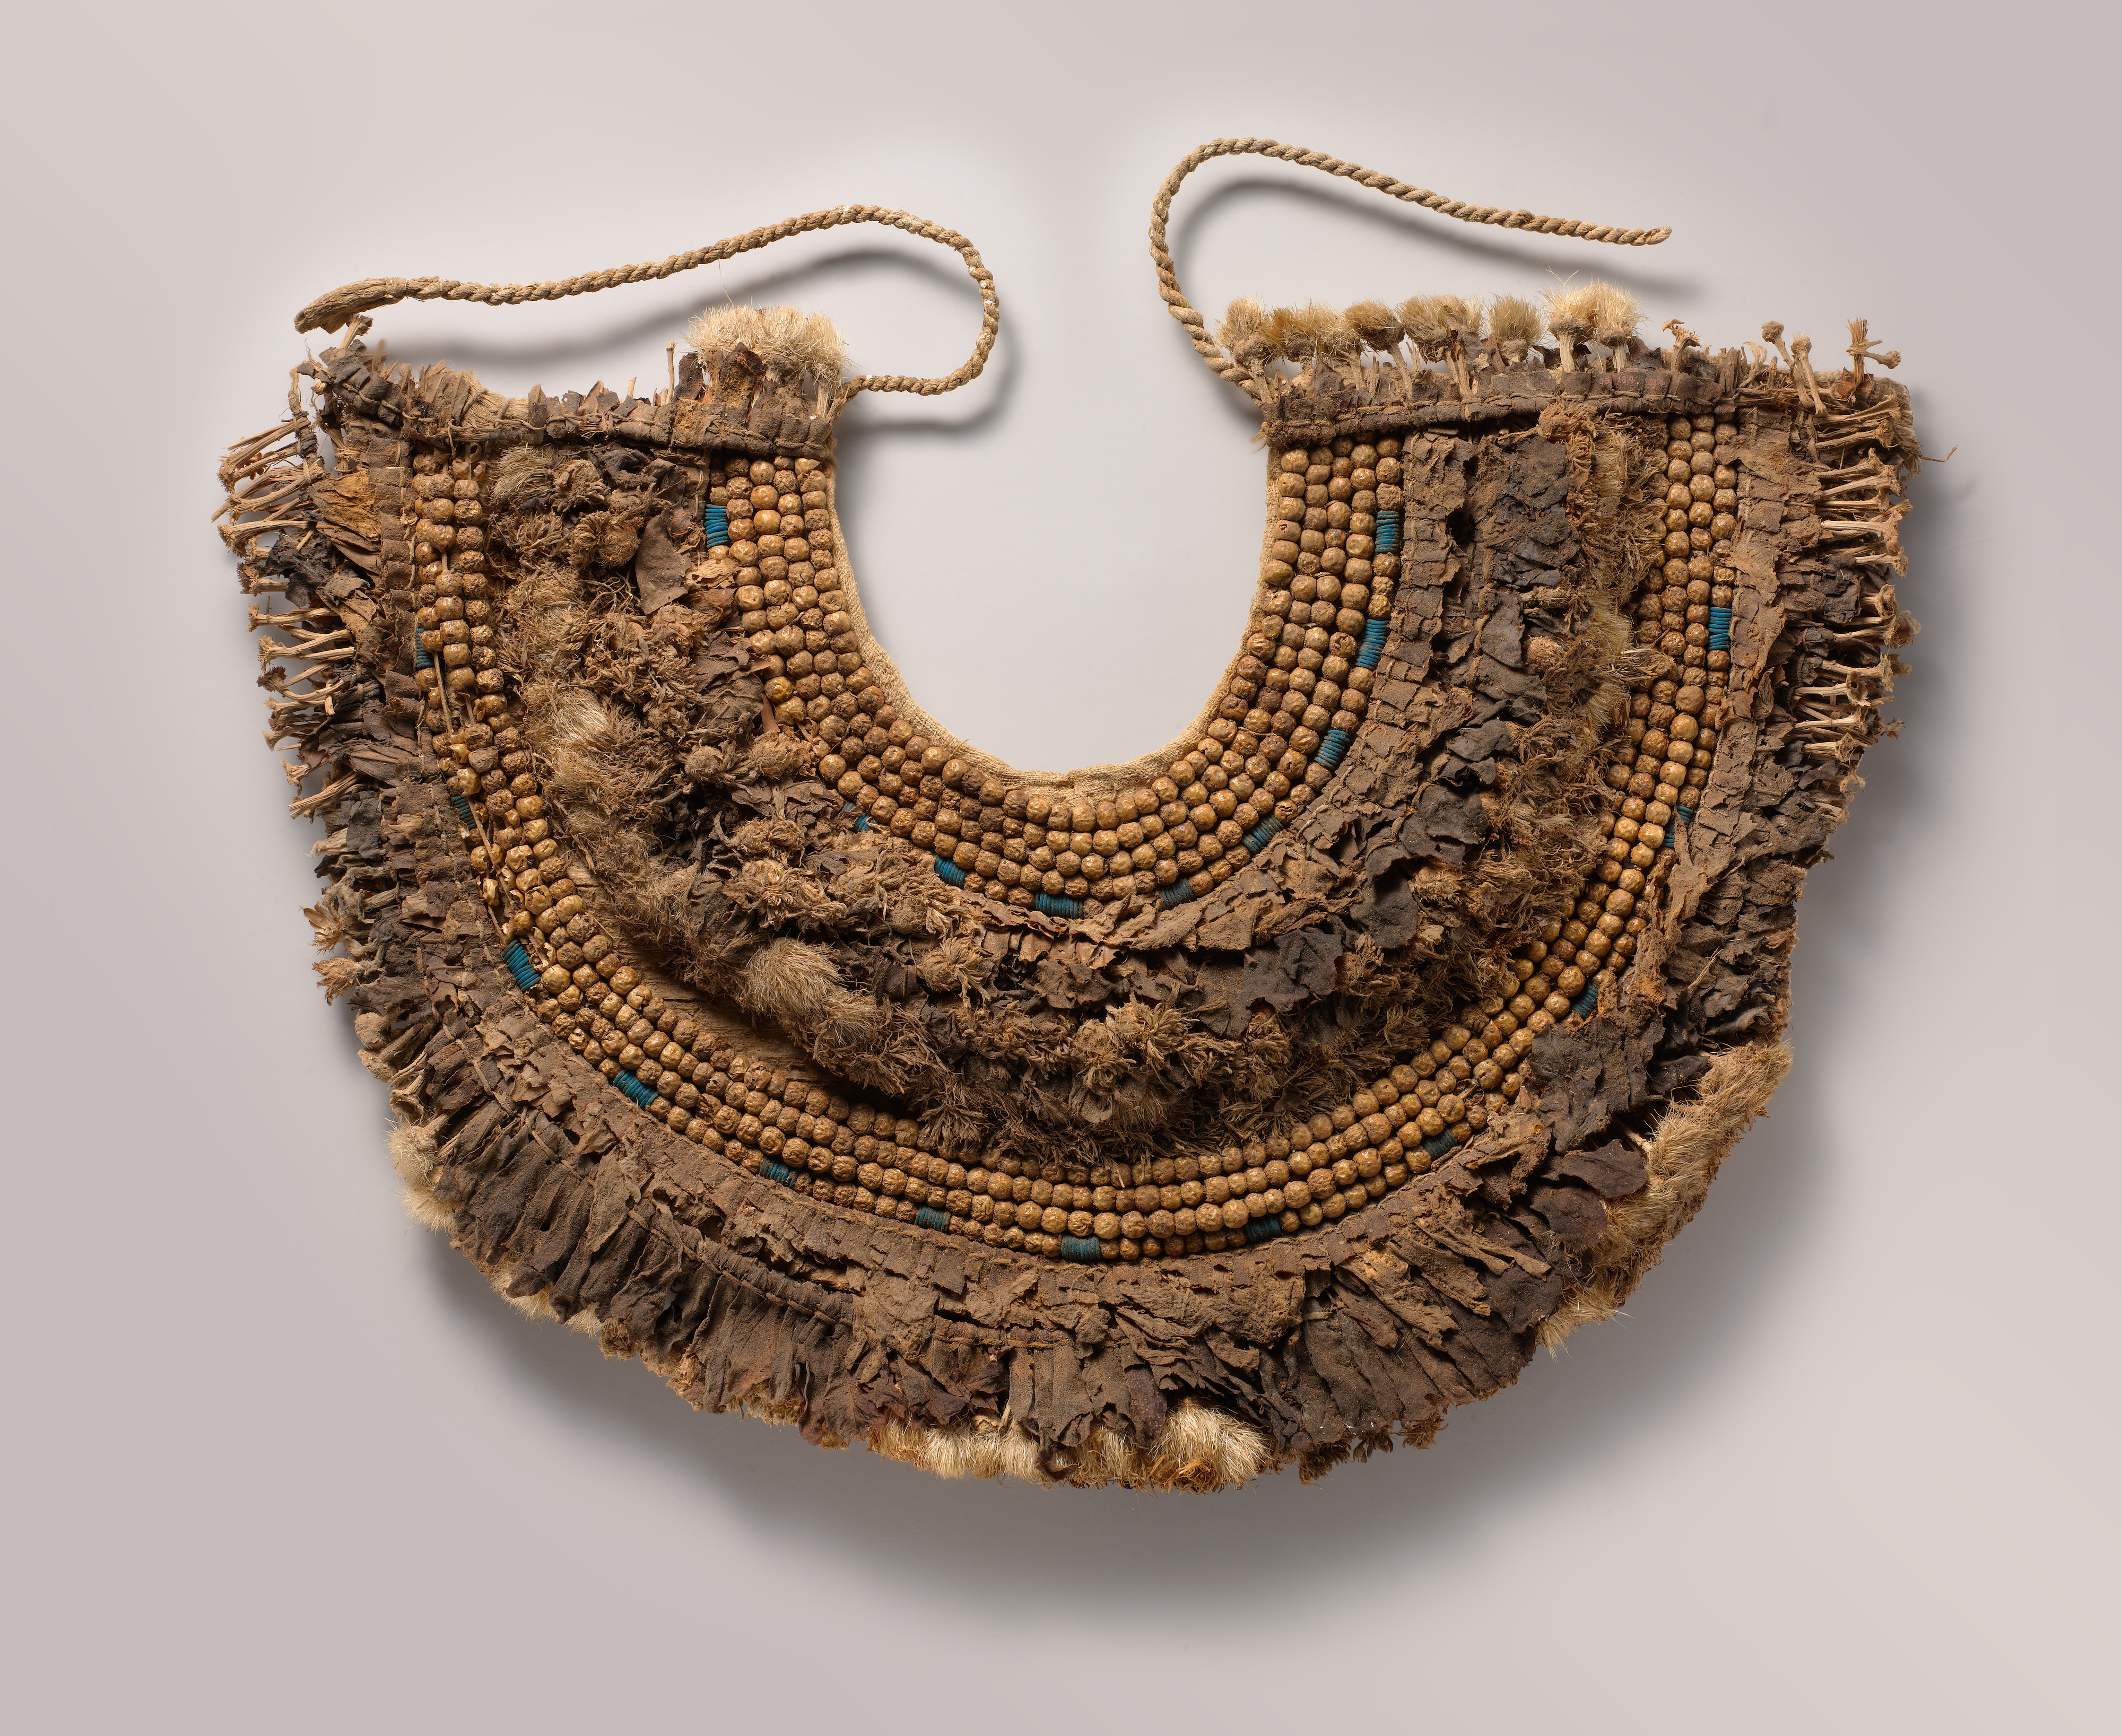 Floral collar from Tutankhamun’s embalming cache